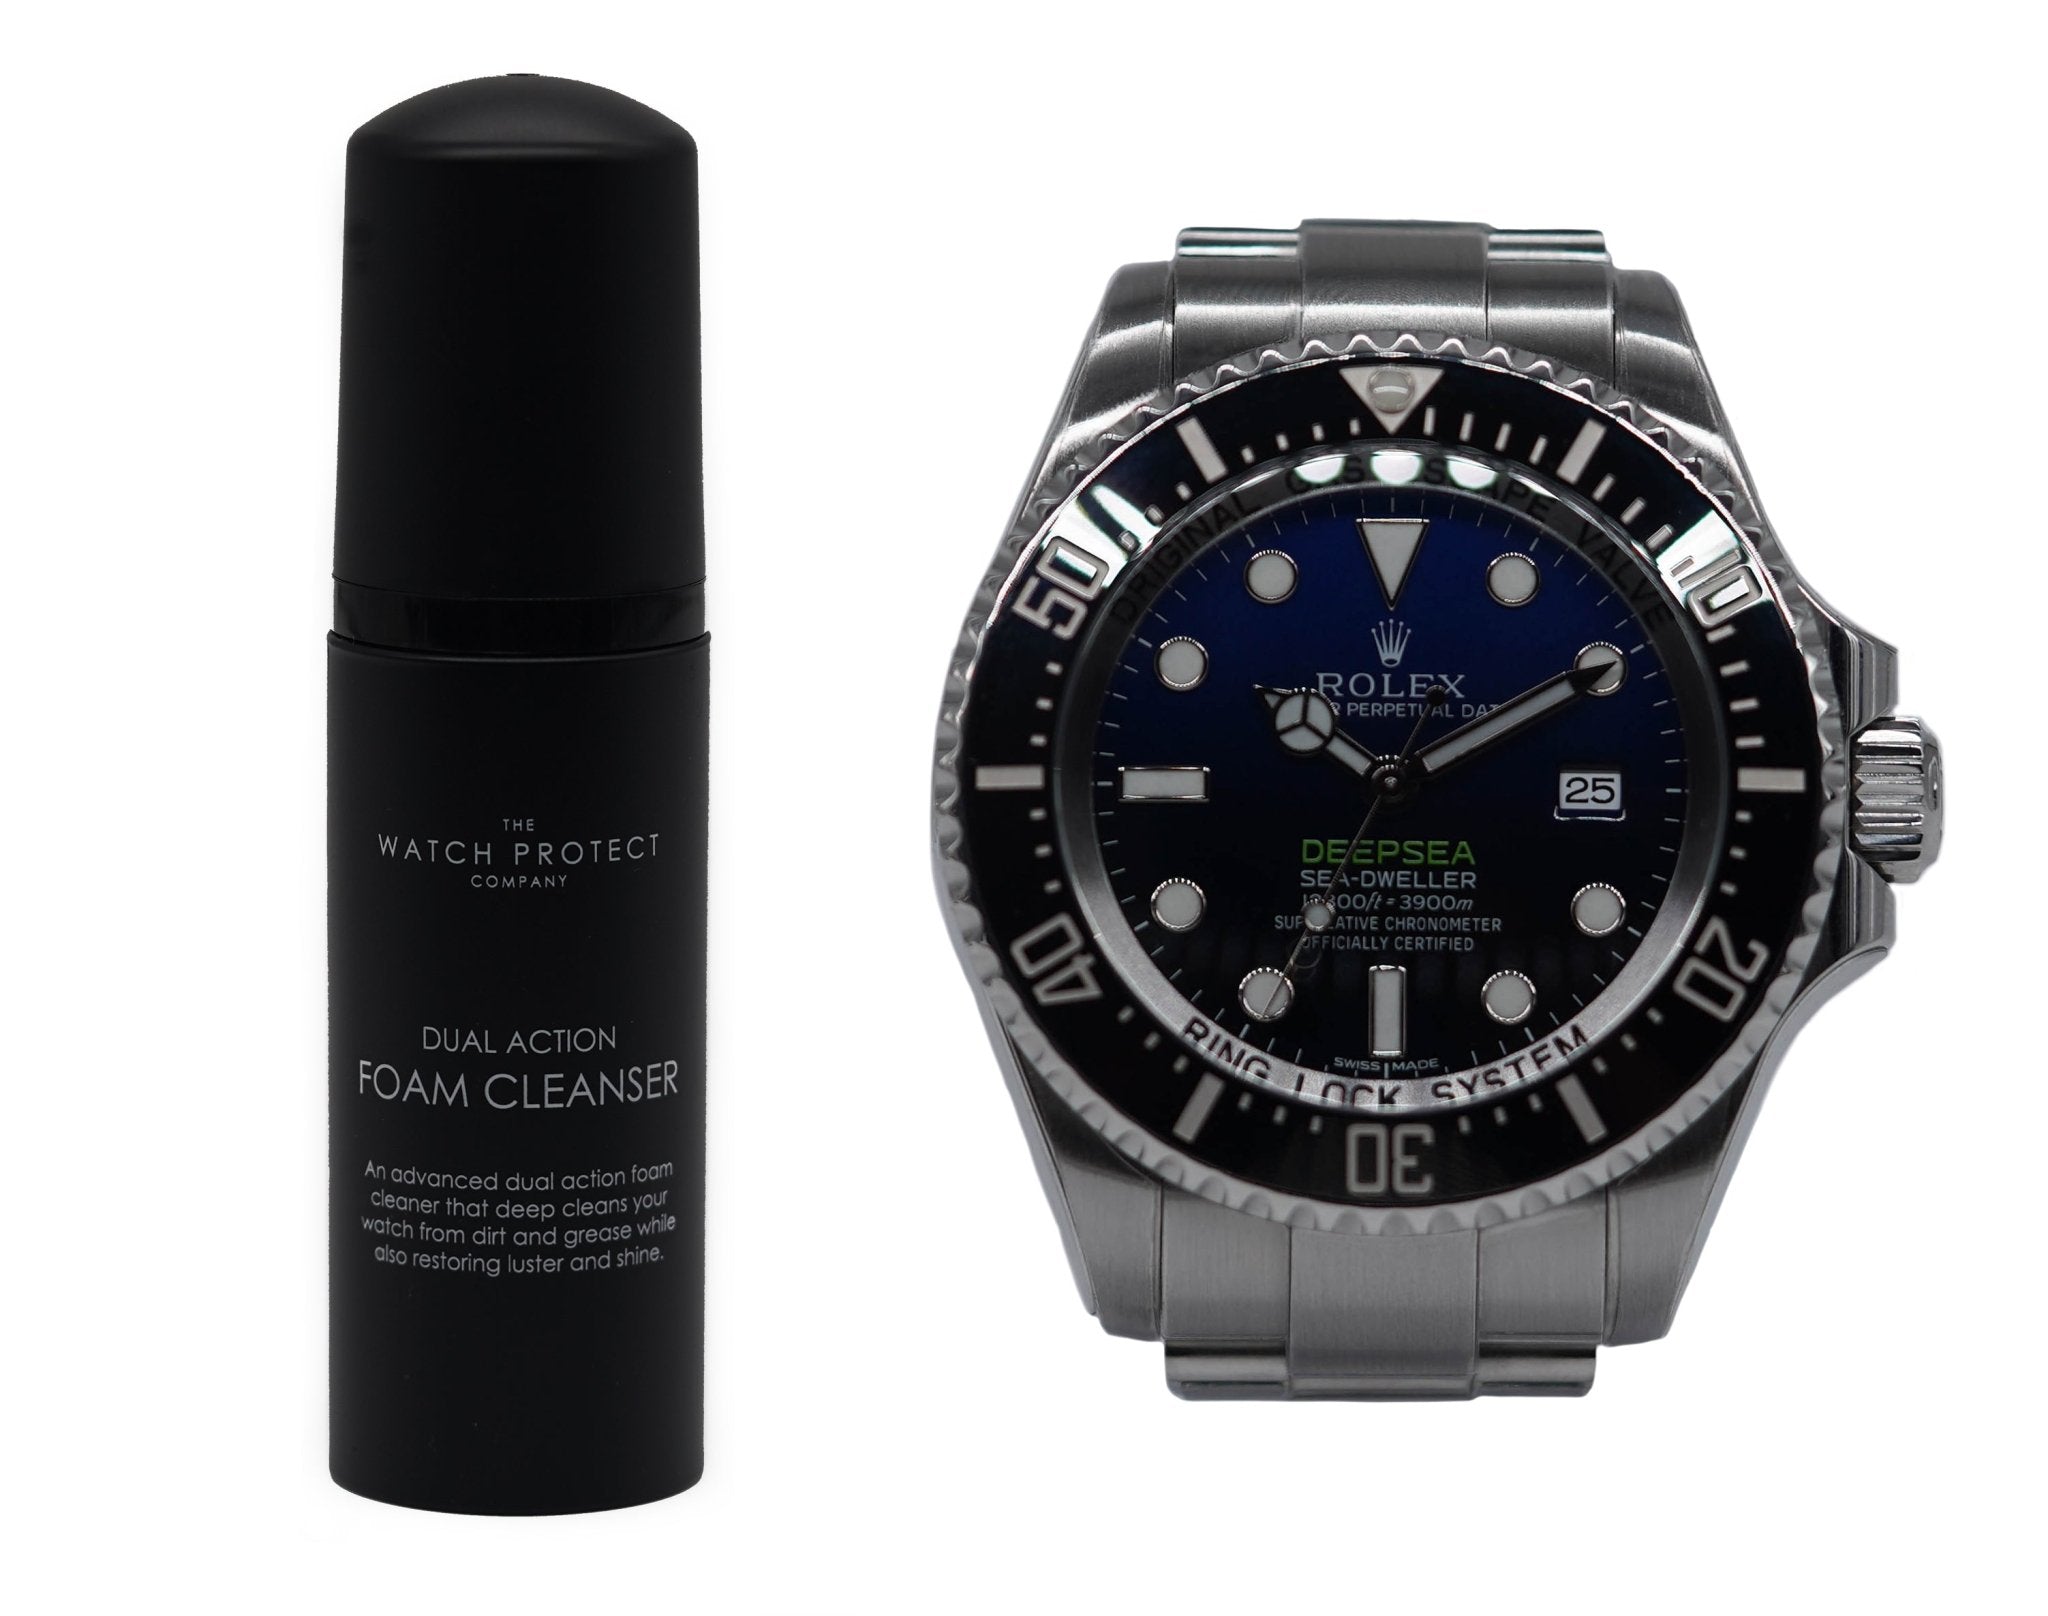 DUAL ACTION FOAM CLEANER & ROLEX DEEPSEA SEA DWELLER - TIER 3 - WATCH PROTECTION KIT BUNDLE - The Watch Protect Company